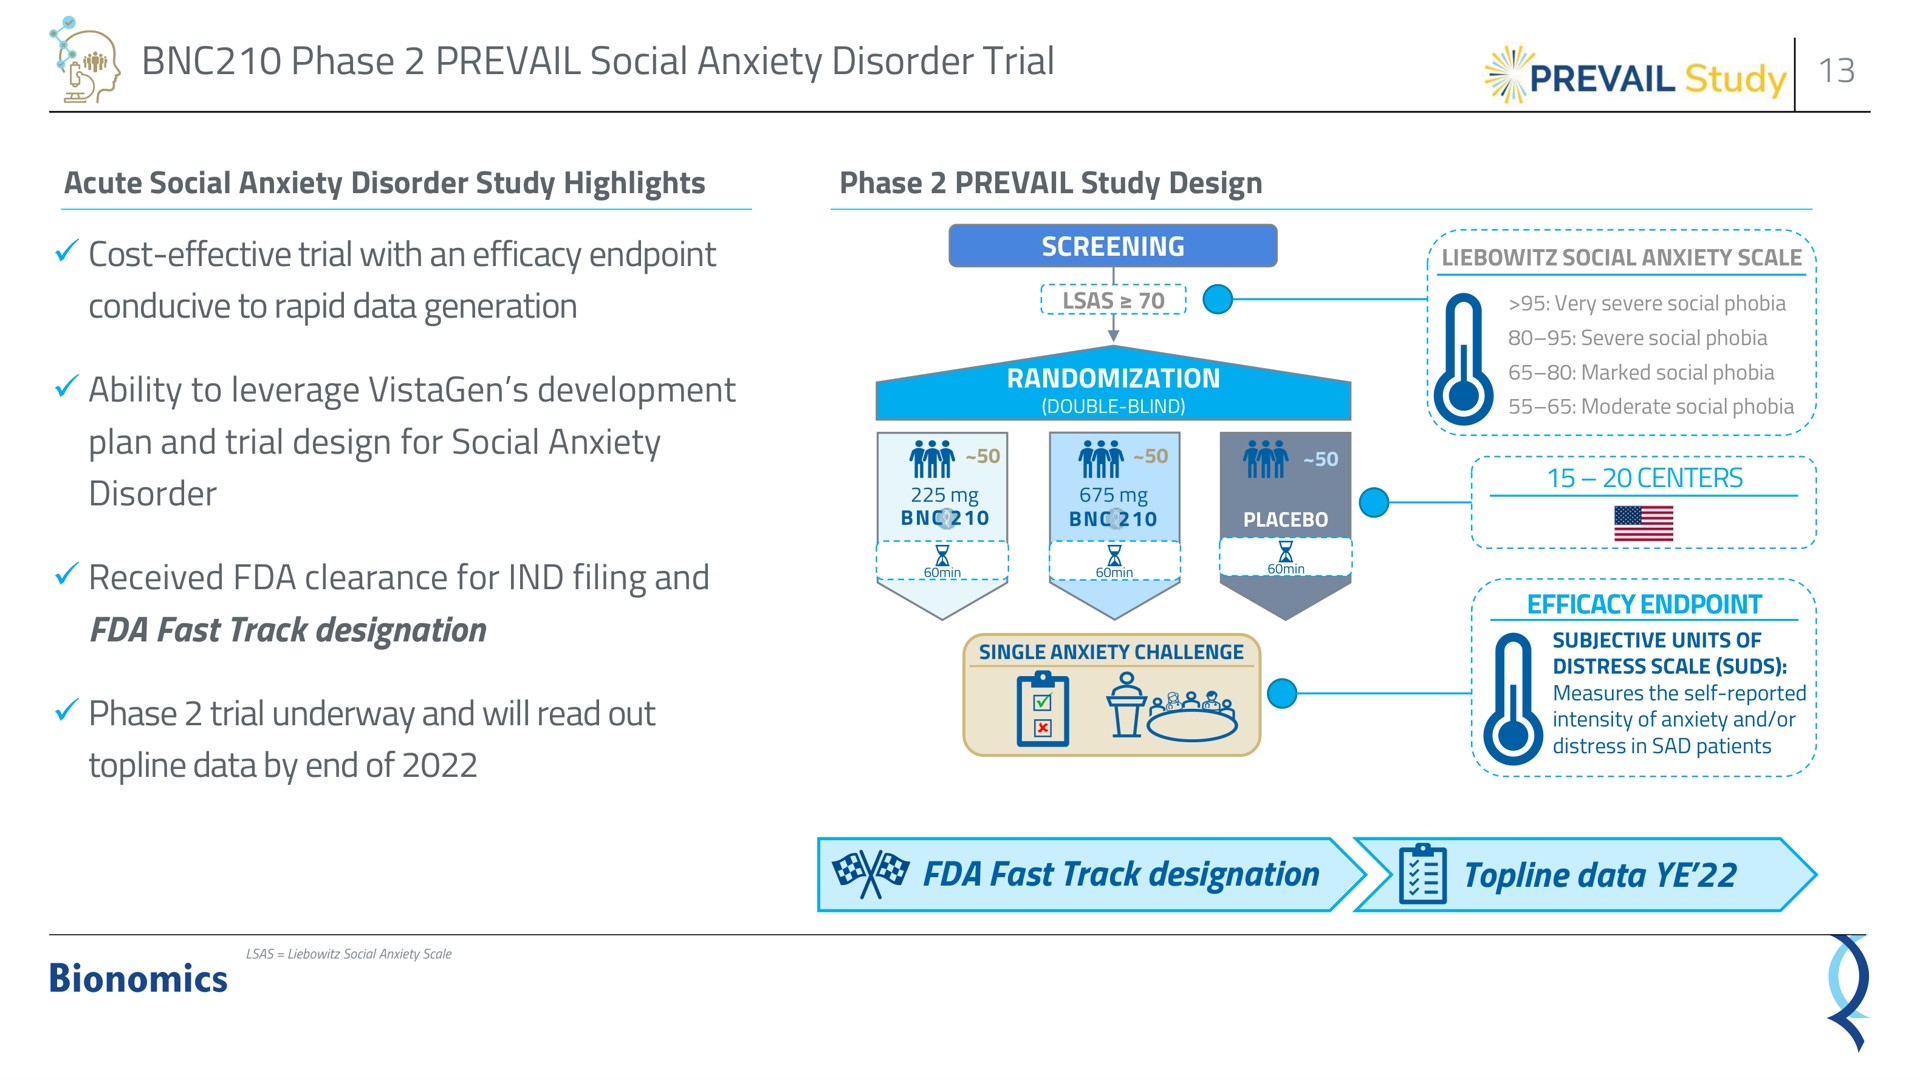 phase prevail social anxiety disorder trial cost effective trial with an efficacy conducive to rapid data generation ability to leverage development plan and trial design for social anxiety disorder received clearance for filing and fast track designation phase trial underway and will read out topline data by end of fast track designation topline data fees | Bionomics